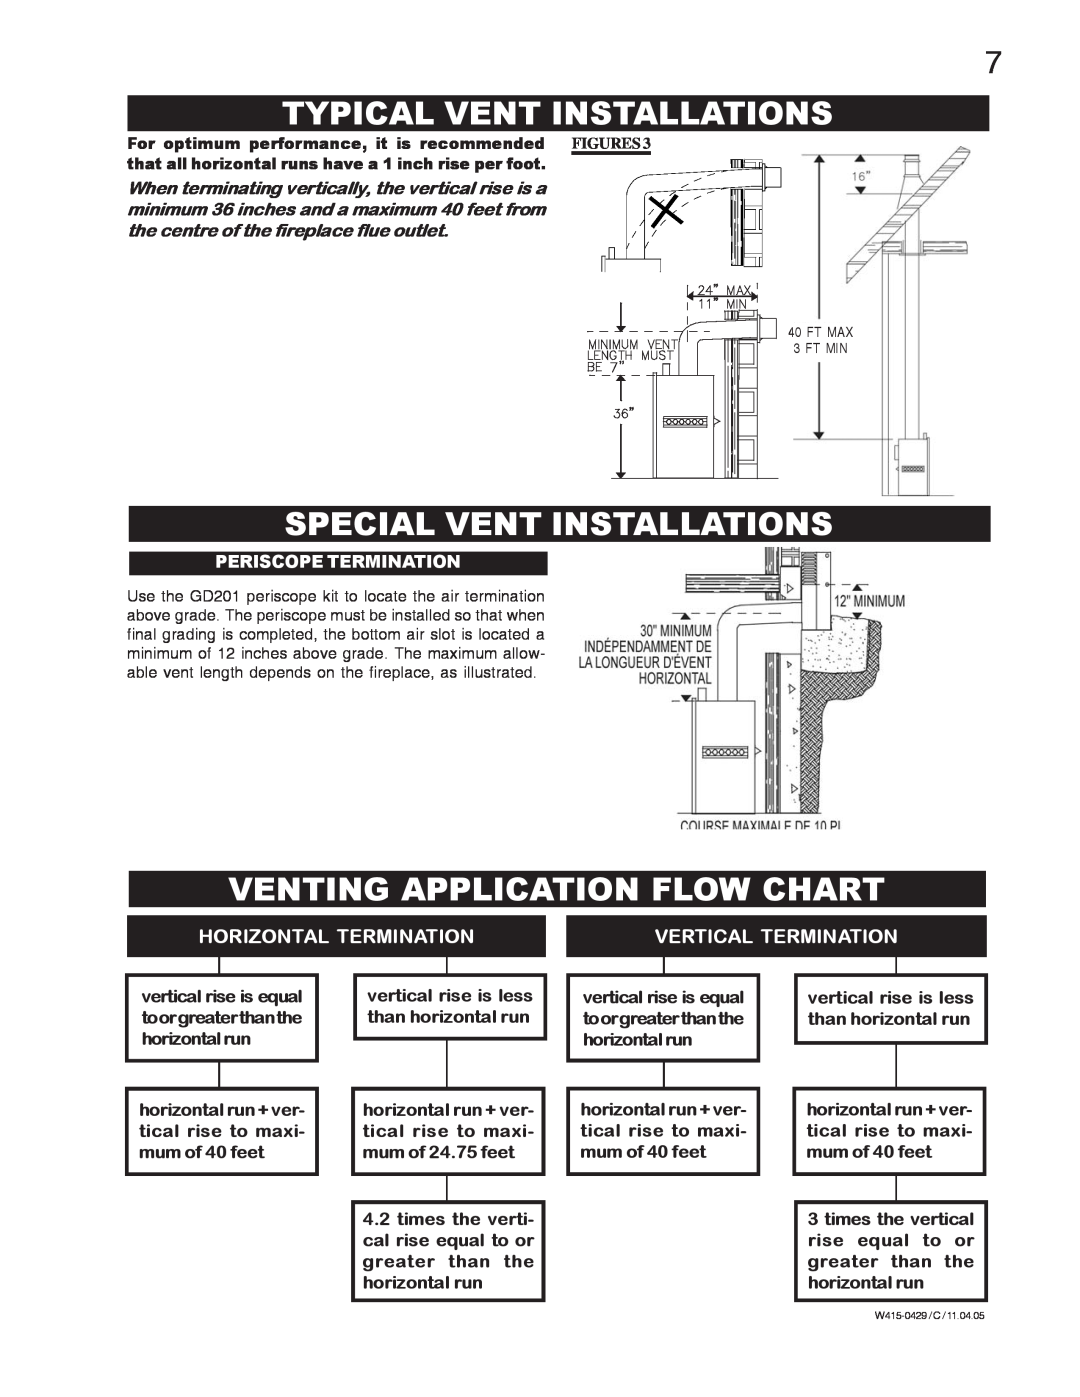 Napoleon Fireplaces GE38NT-M manual Typical Vent Installations, Special Vent Installations, Venting Application Flow Chart 